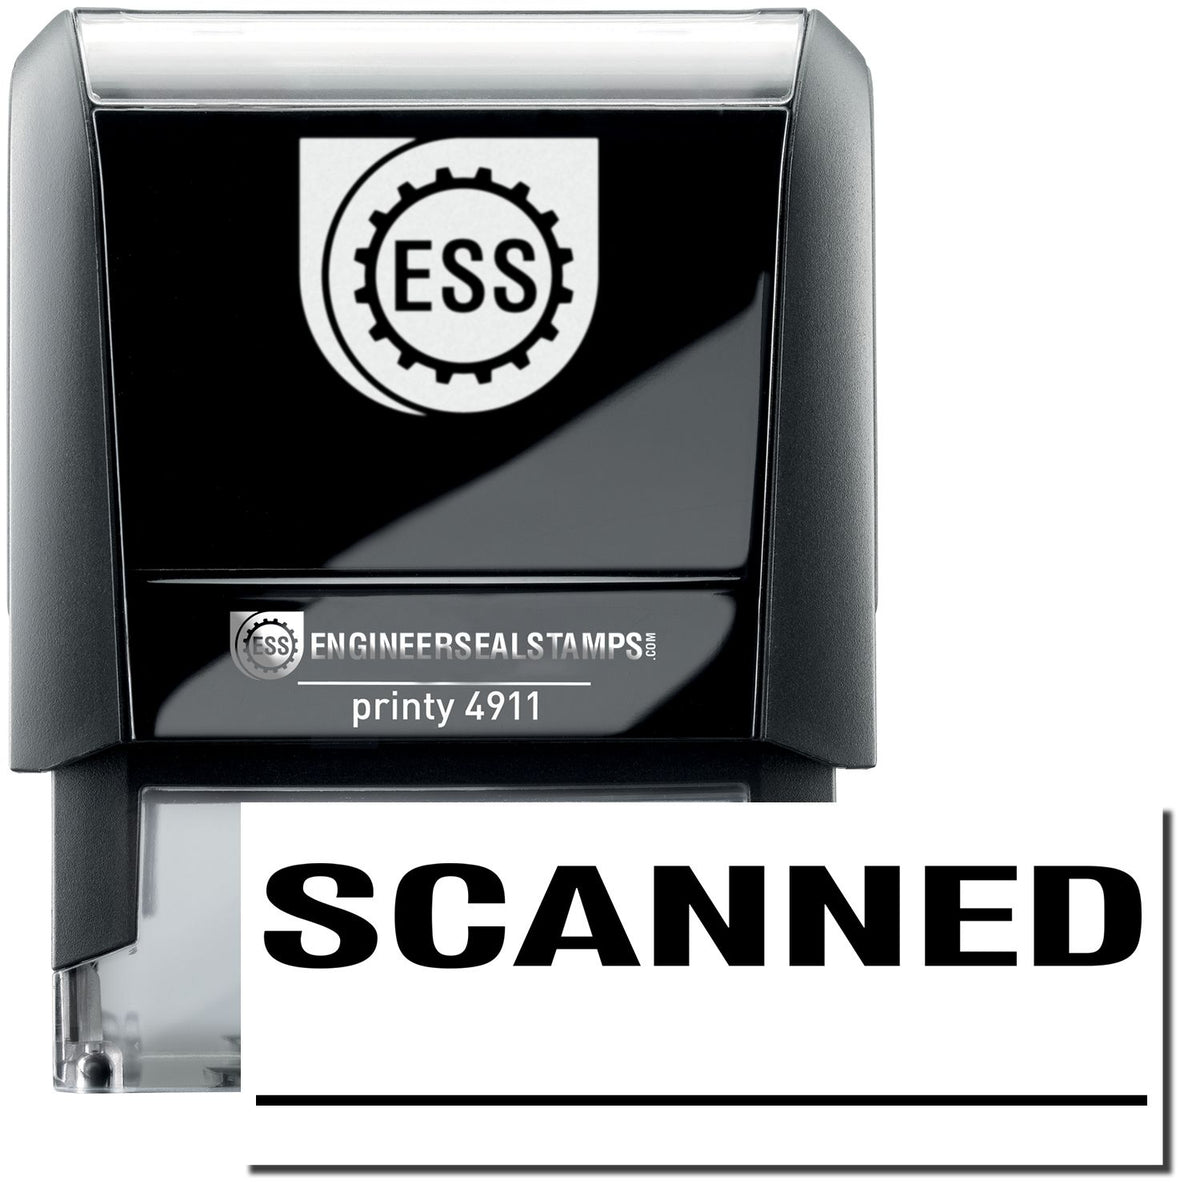 A self-inking stamp with a stamped image showing how the text &quot;SCANNED&quot; with a line under it is displayed after stamping.